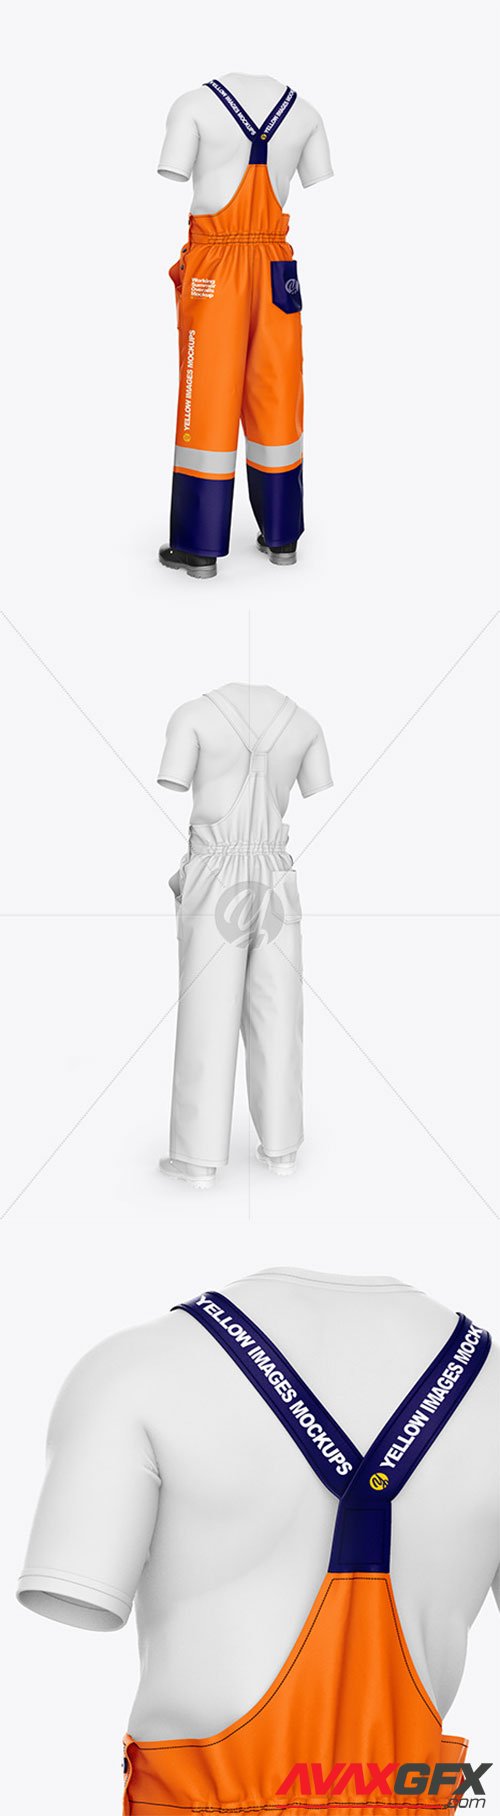 Working summer overalls – Back Half Side View 61467